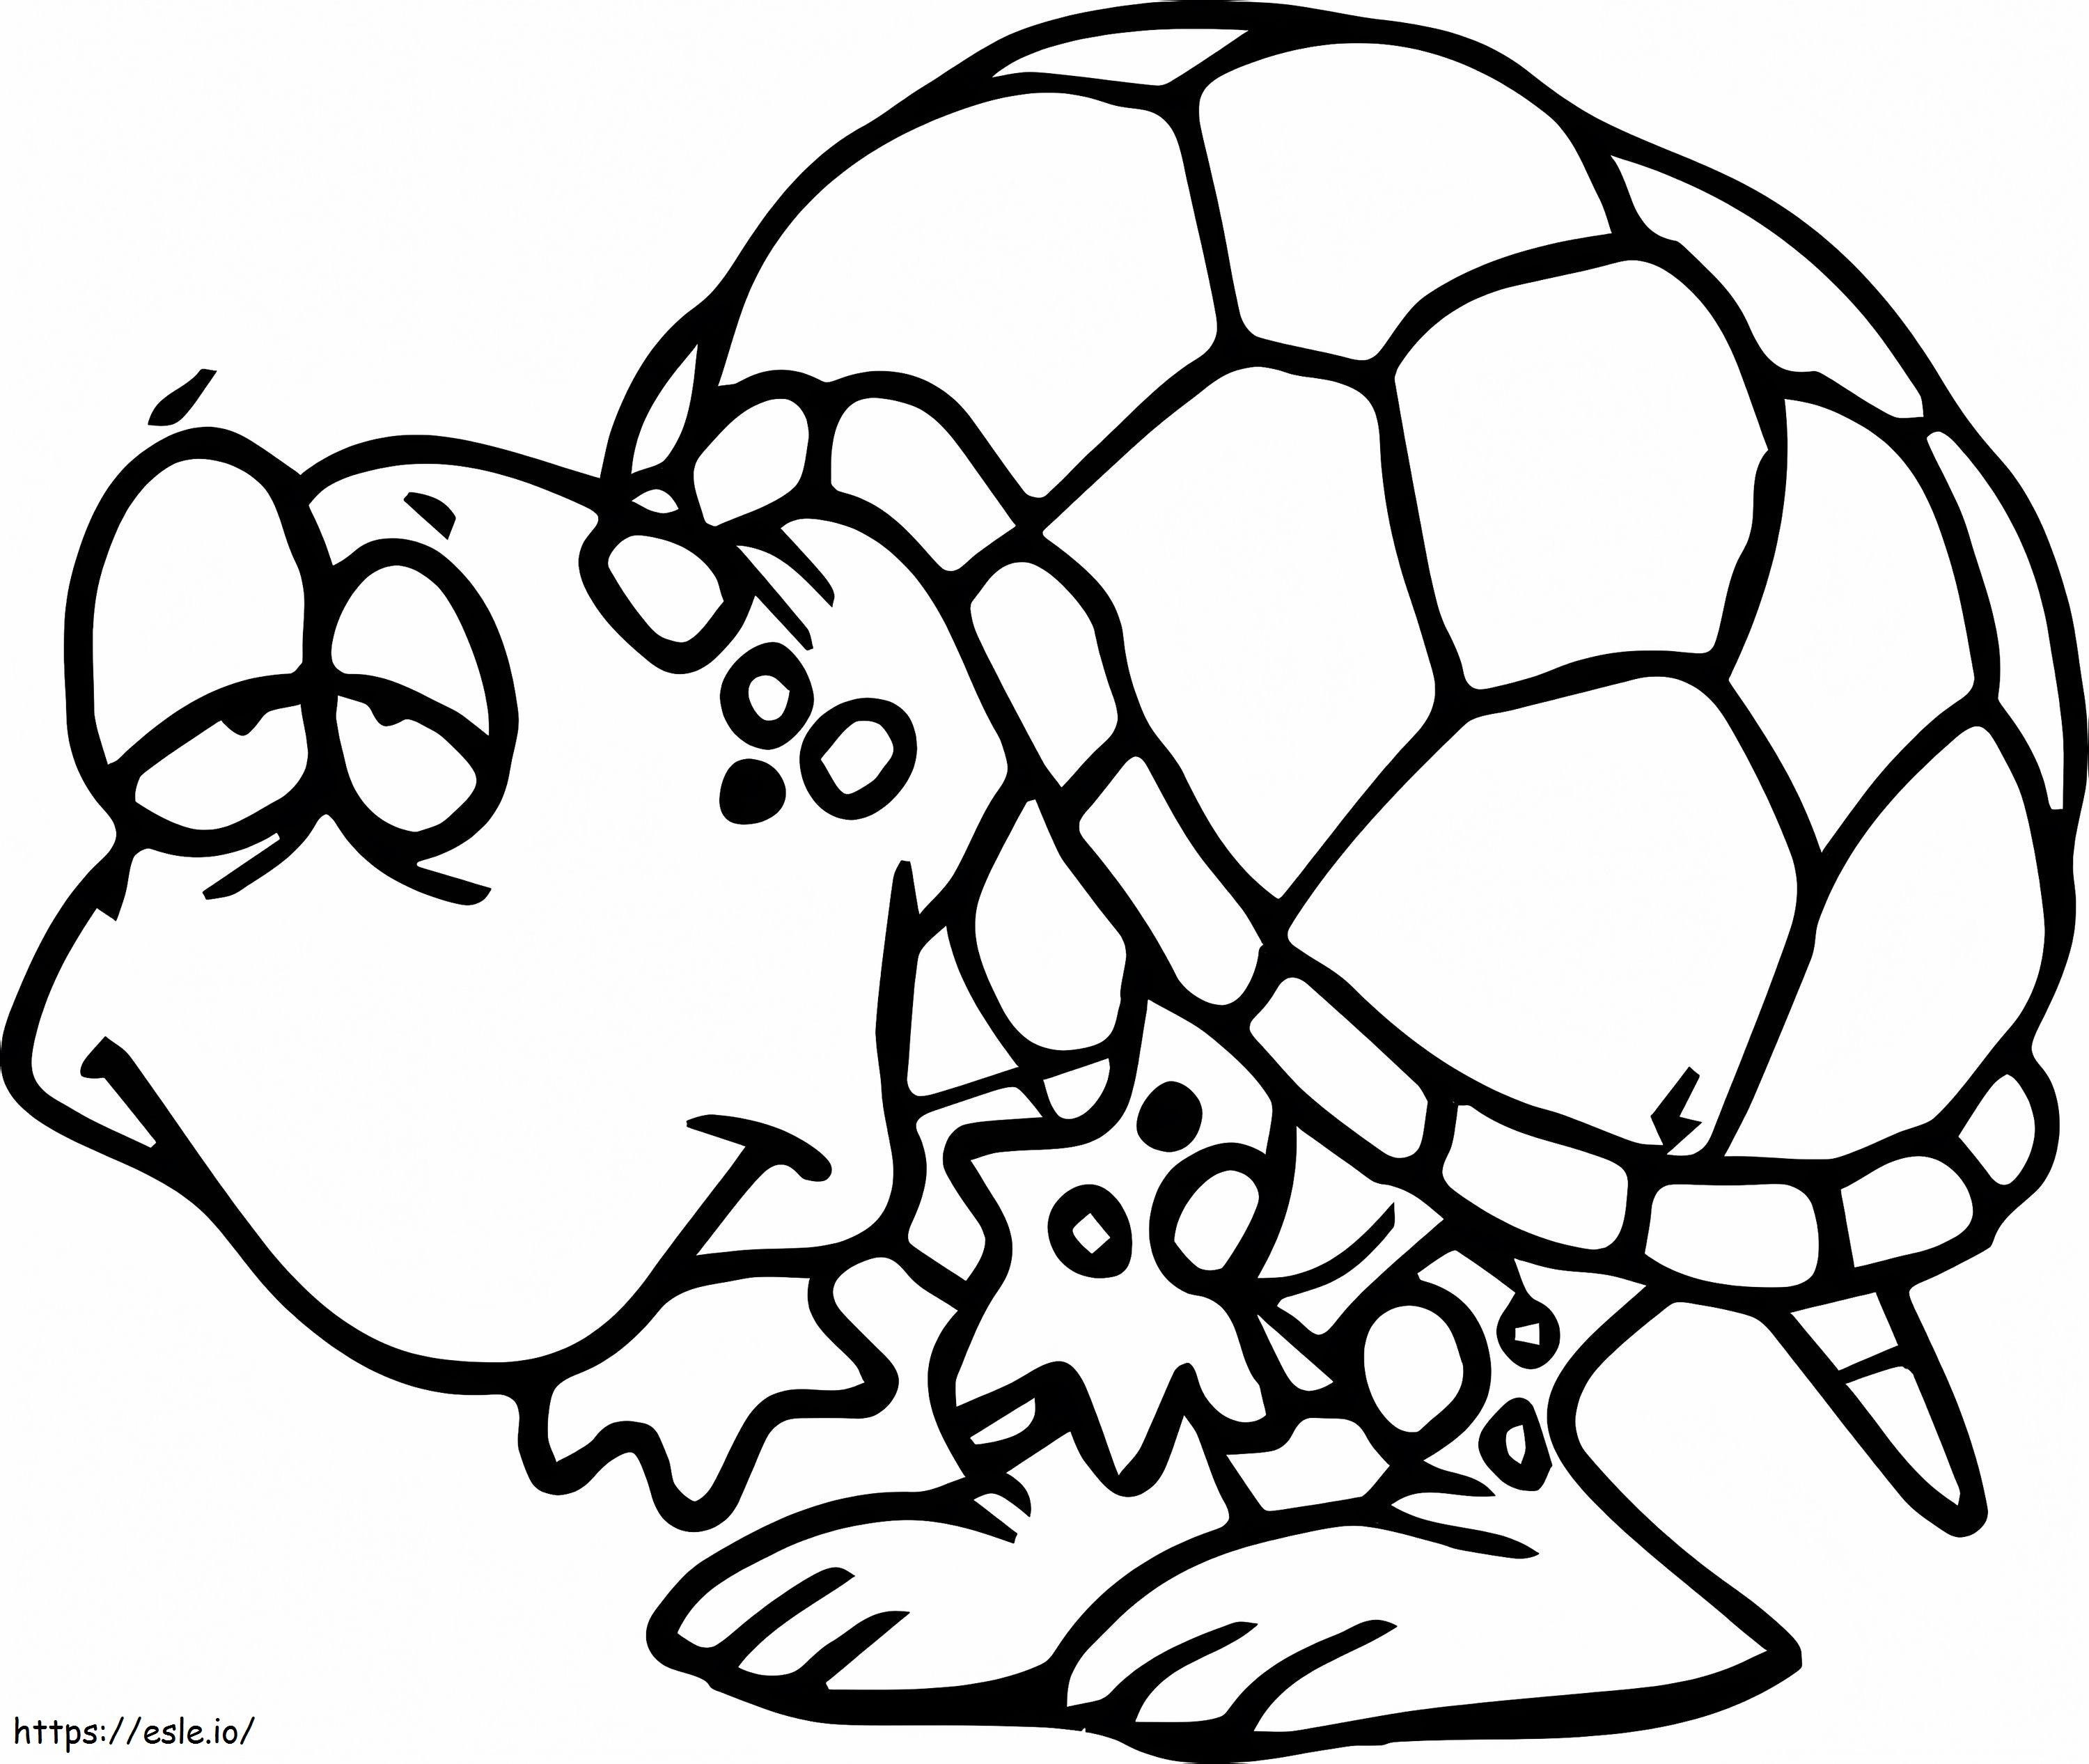 An Old Turtle coloring page